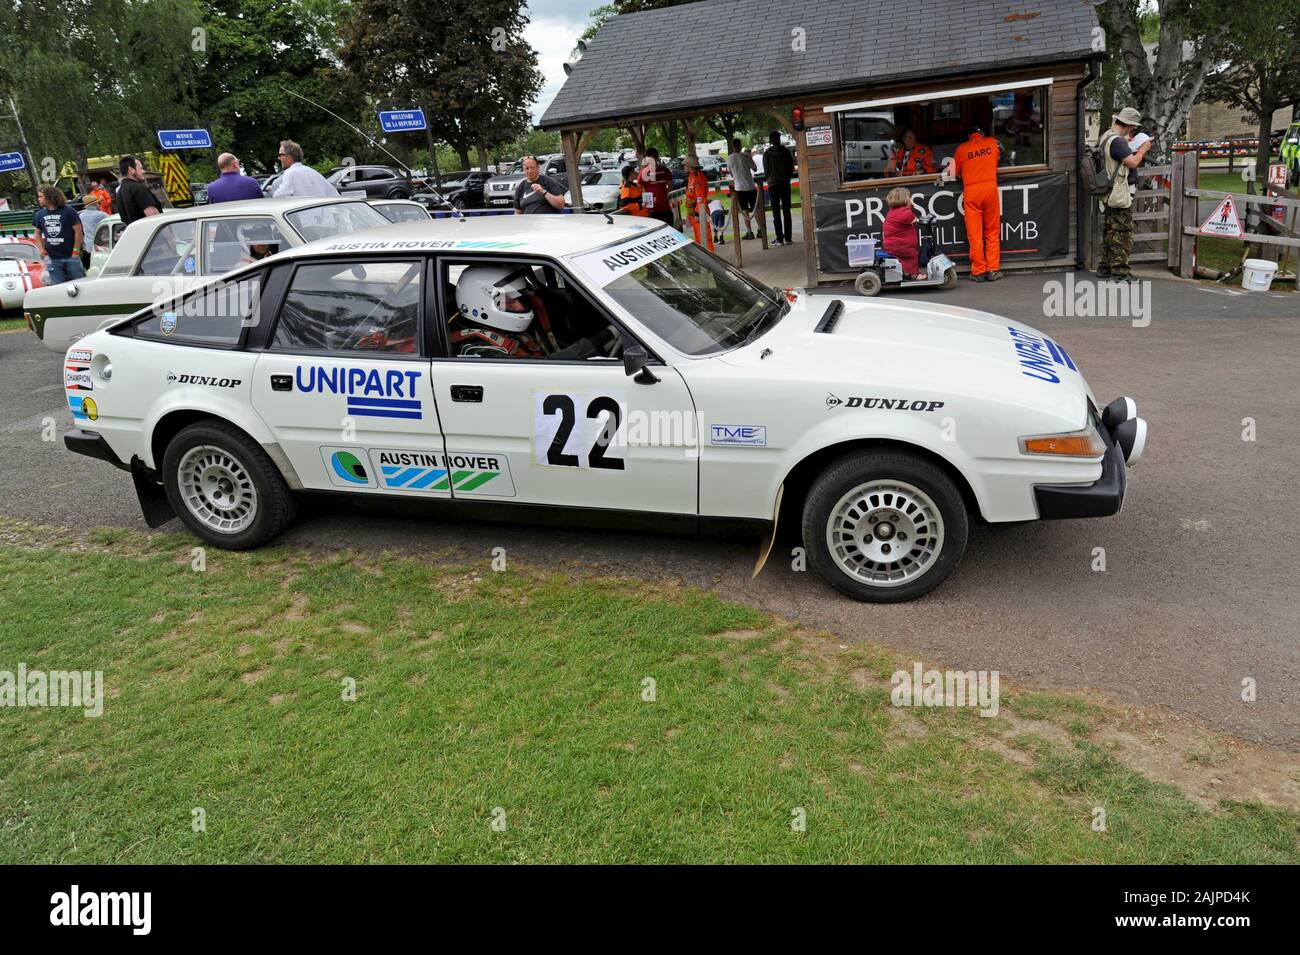 A 1977 Rover SD1 3500 Automatic racing car pictured waiting to race at Prescott Hill Climb, Gloucestershire Stock Photo